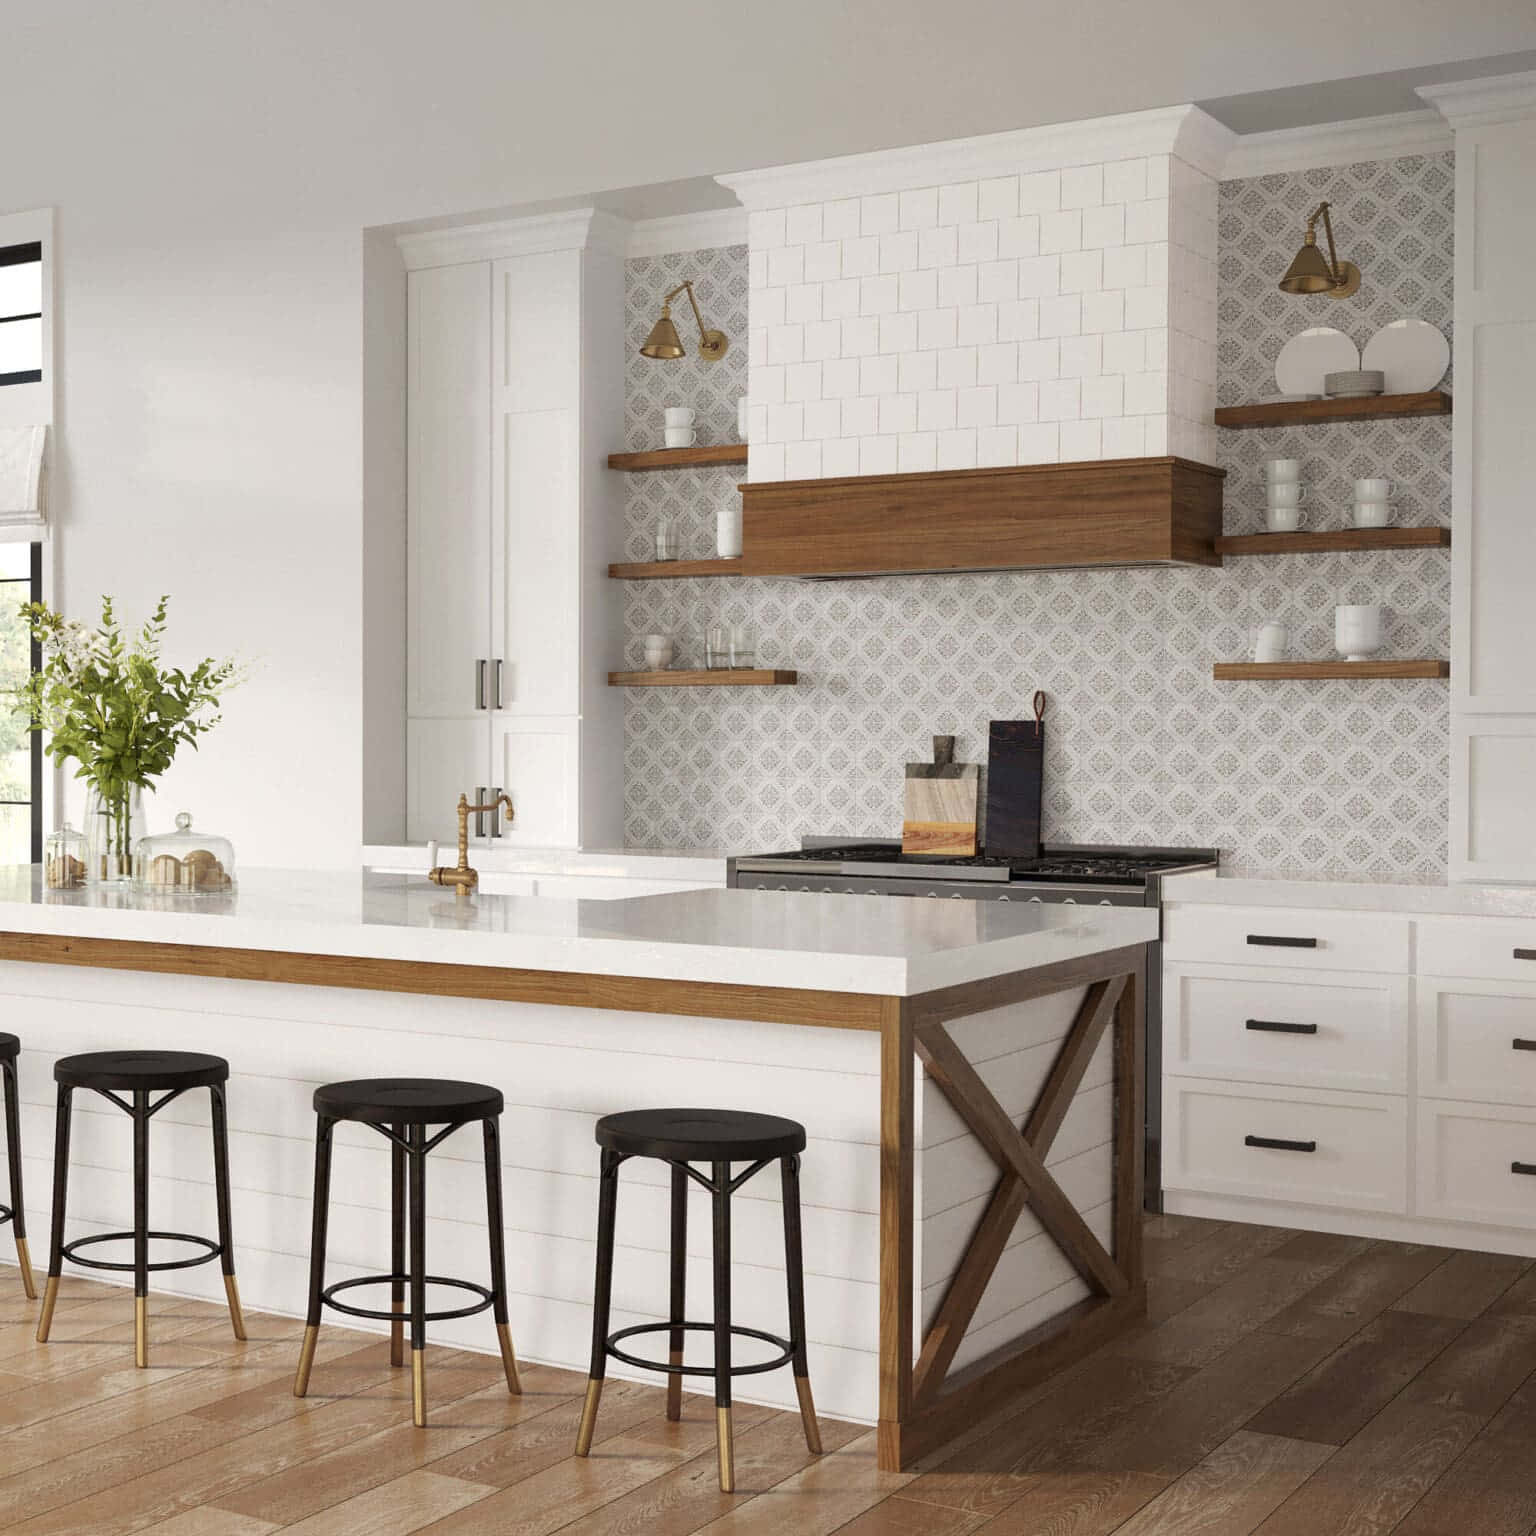 A White Kitchen With Wooden Floors And Stools